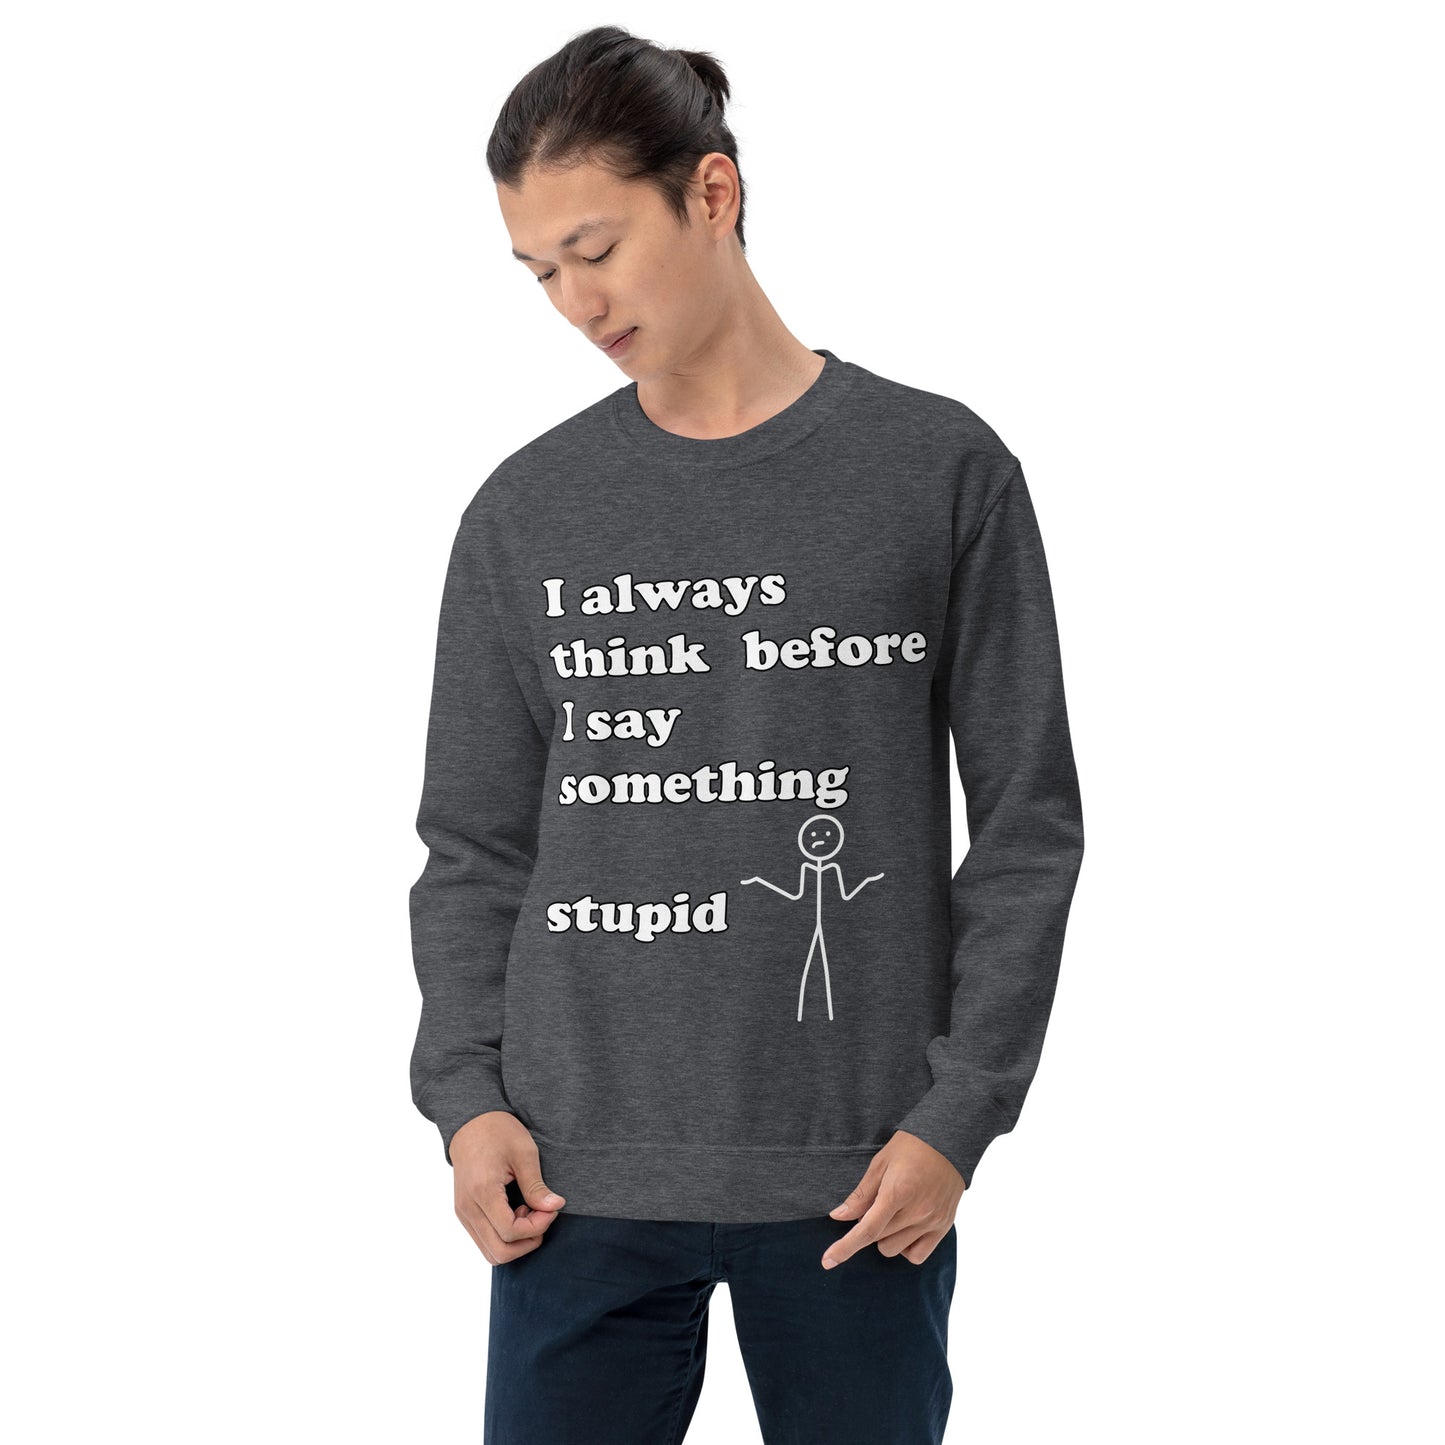 Man with grey sweatshirt with text "I always think before I say something stupid"